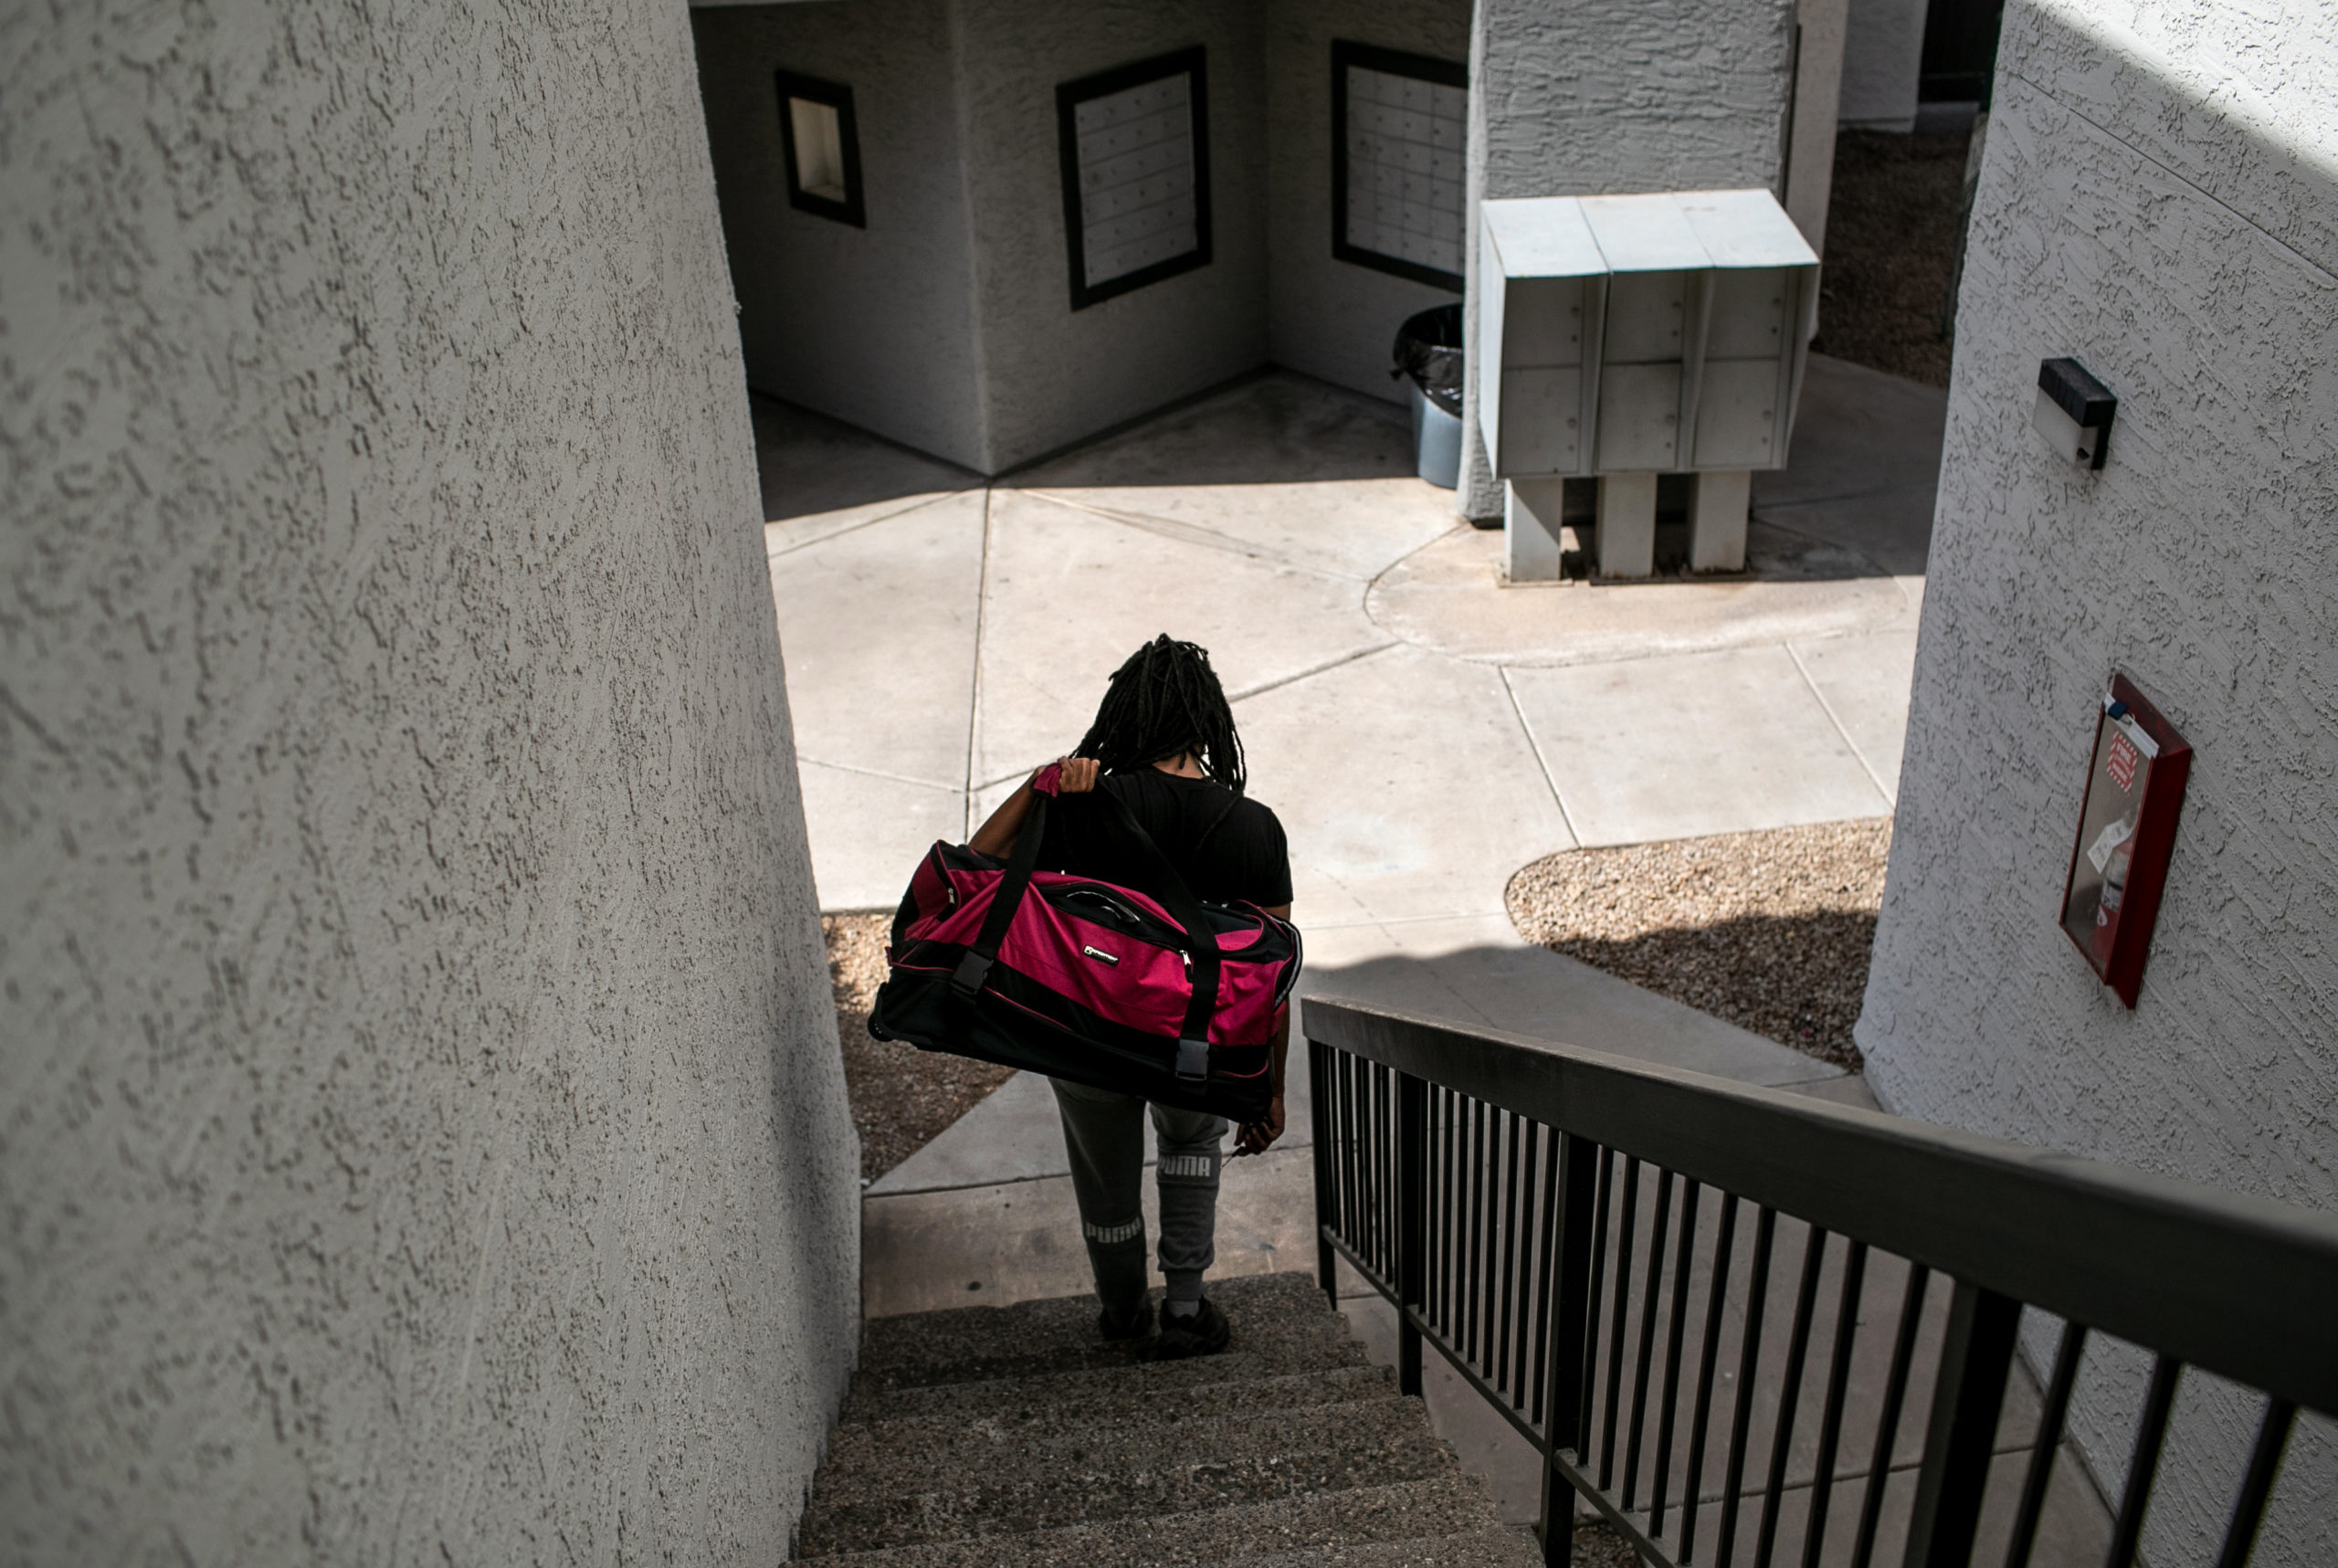 PHOENIX, ARIZONA - OCTOBER 05: An apartment resident carries out a bag of clothing while being evicted for non-payment of rent on October 5, 2020 in Phoenix, Arizona. Thousands of court-ordered evictions continue nationwide despite a Centers for Disease Control (CDC) moratorium for renters impacted by the coronavirus pandemic. Although state and county officials say they have tried to educate the public on the protections, many renters remain unaware and fail to complete the necessary forms to remain in their homes. In many cases landlords have worked out more flexible payment plans with vulnerable tenants, although these temporary solutions have become fraught as the pandemic drags on. With millions of Americans still unemployed due to the pandemic, federal rental assistance proposals remain gridlocked in Congress. The expiry of the CDC moratorium at year's end looms large, as renters and landlord face a potential tsunami of evictions and foreclosures nationwide. (Photo by John Moore/Getty Images)